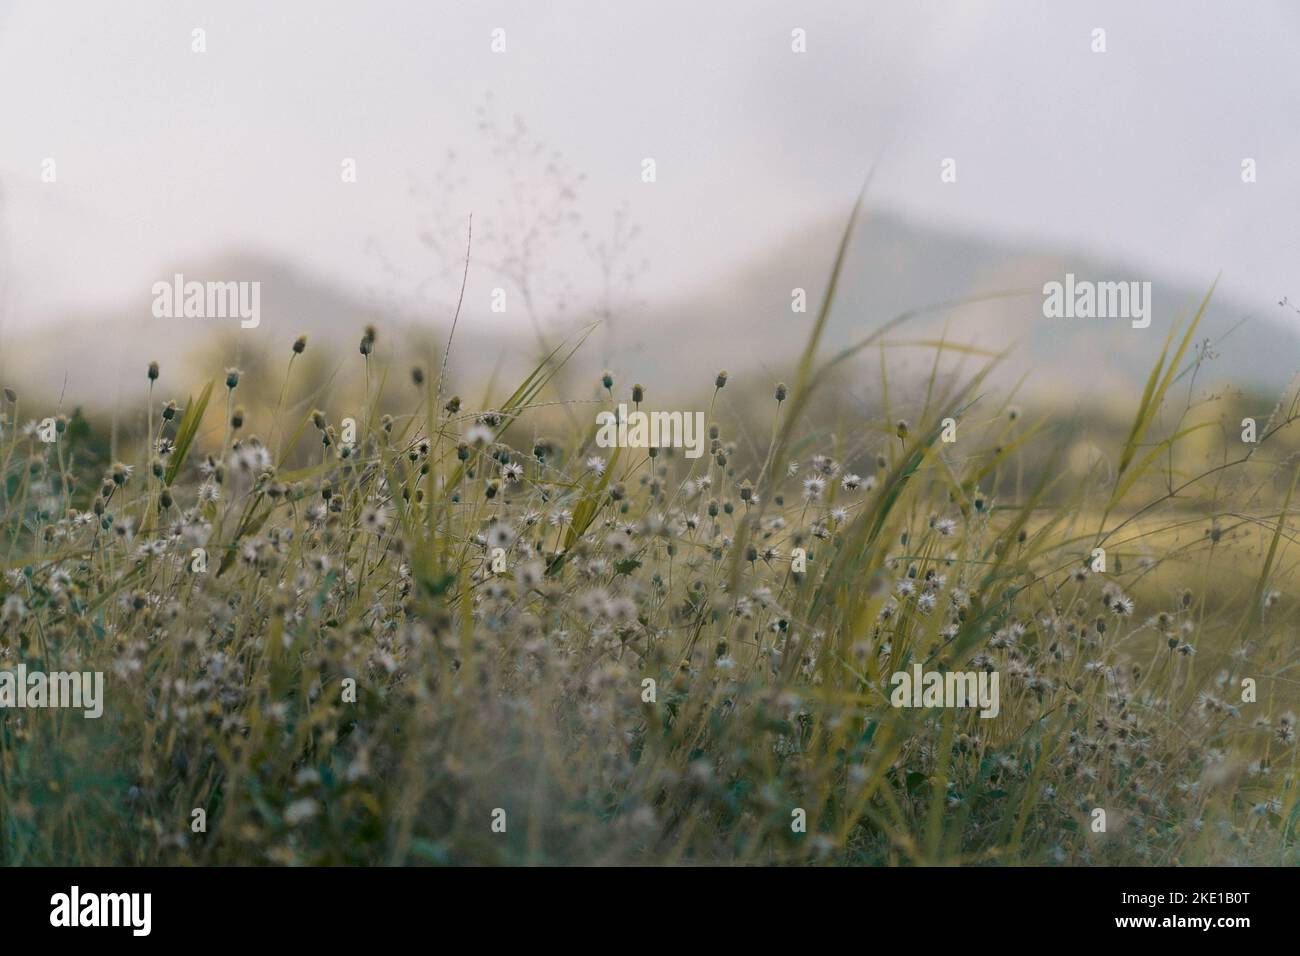 A closeup shot of grass and Eriocaulon heterolepis in autumn, on a field with blurred mountain in the background Stock Photo